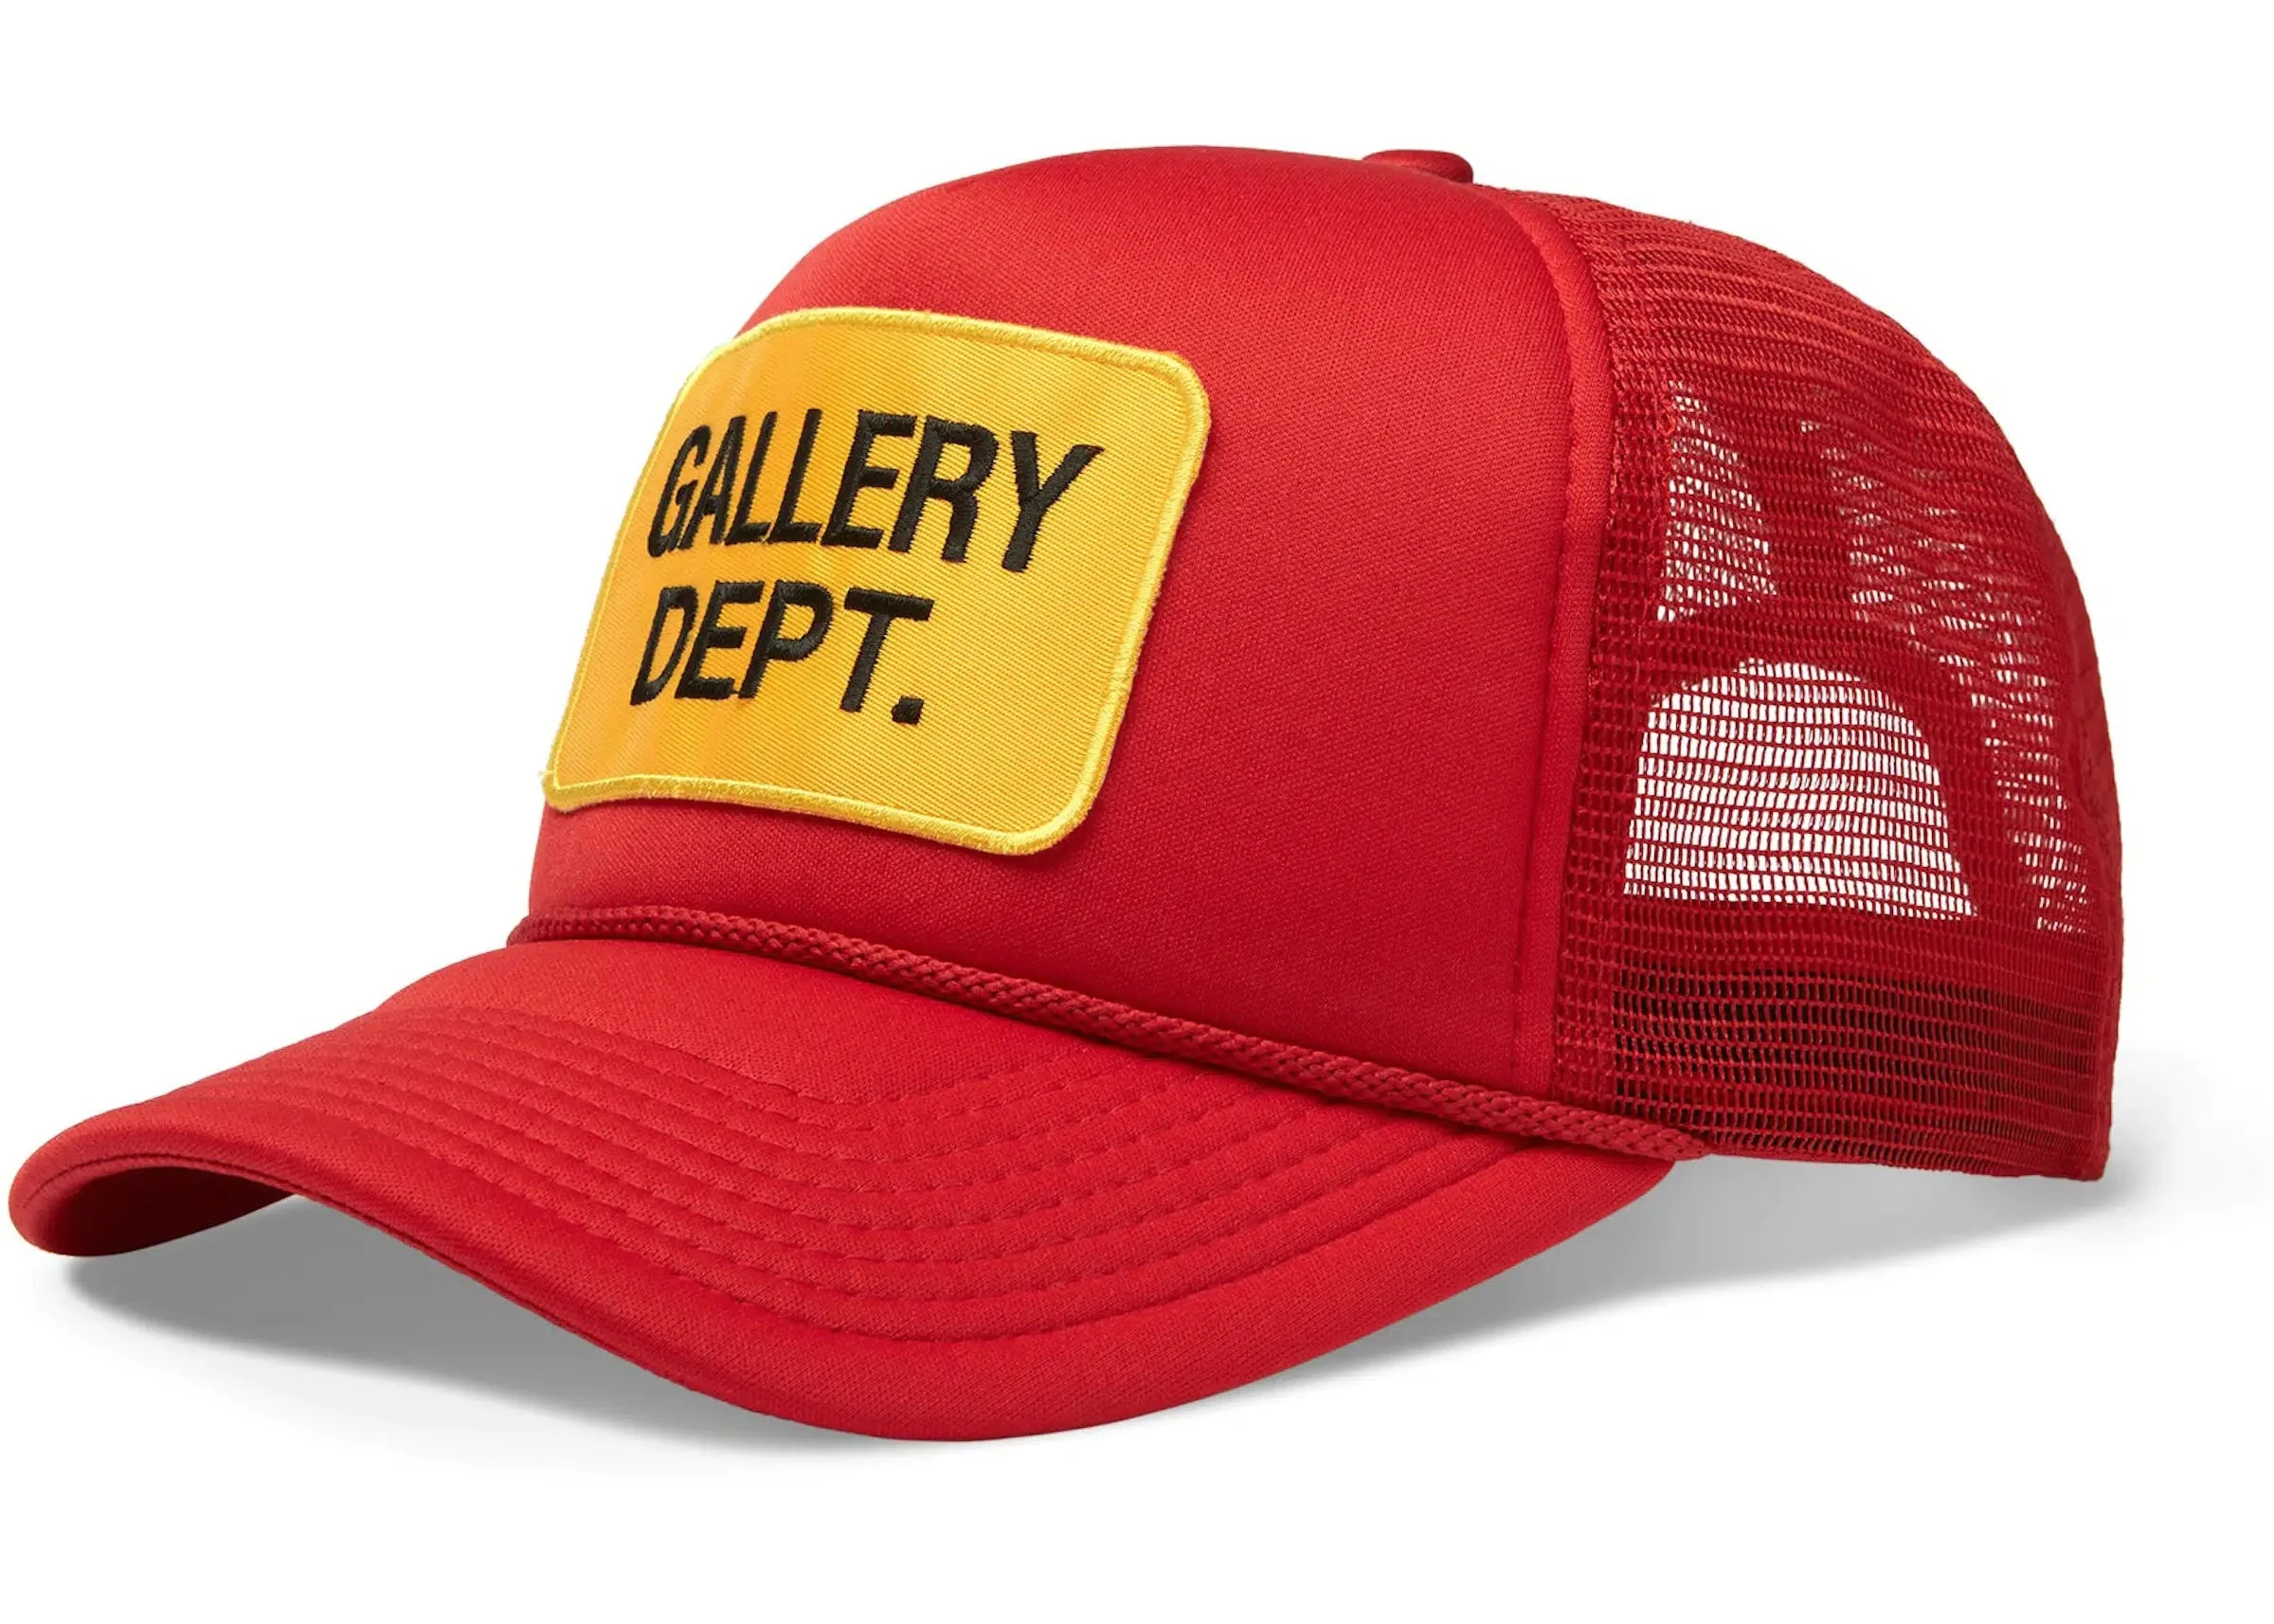 What is Gallery Dept Hat